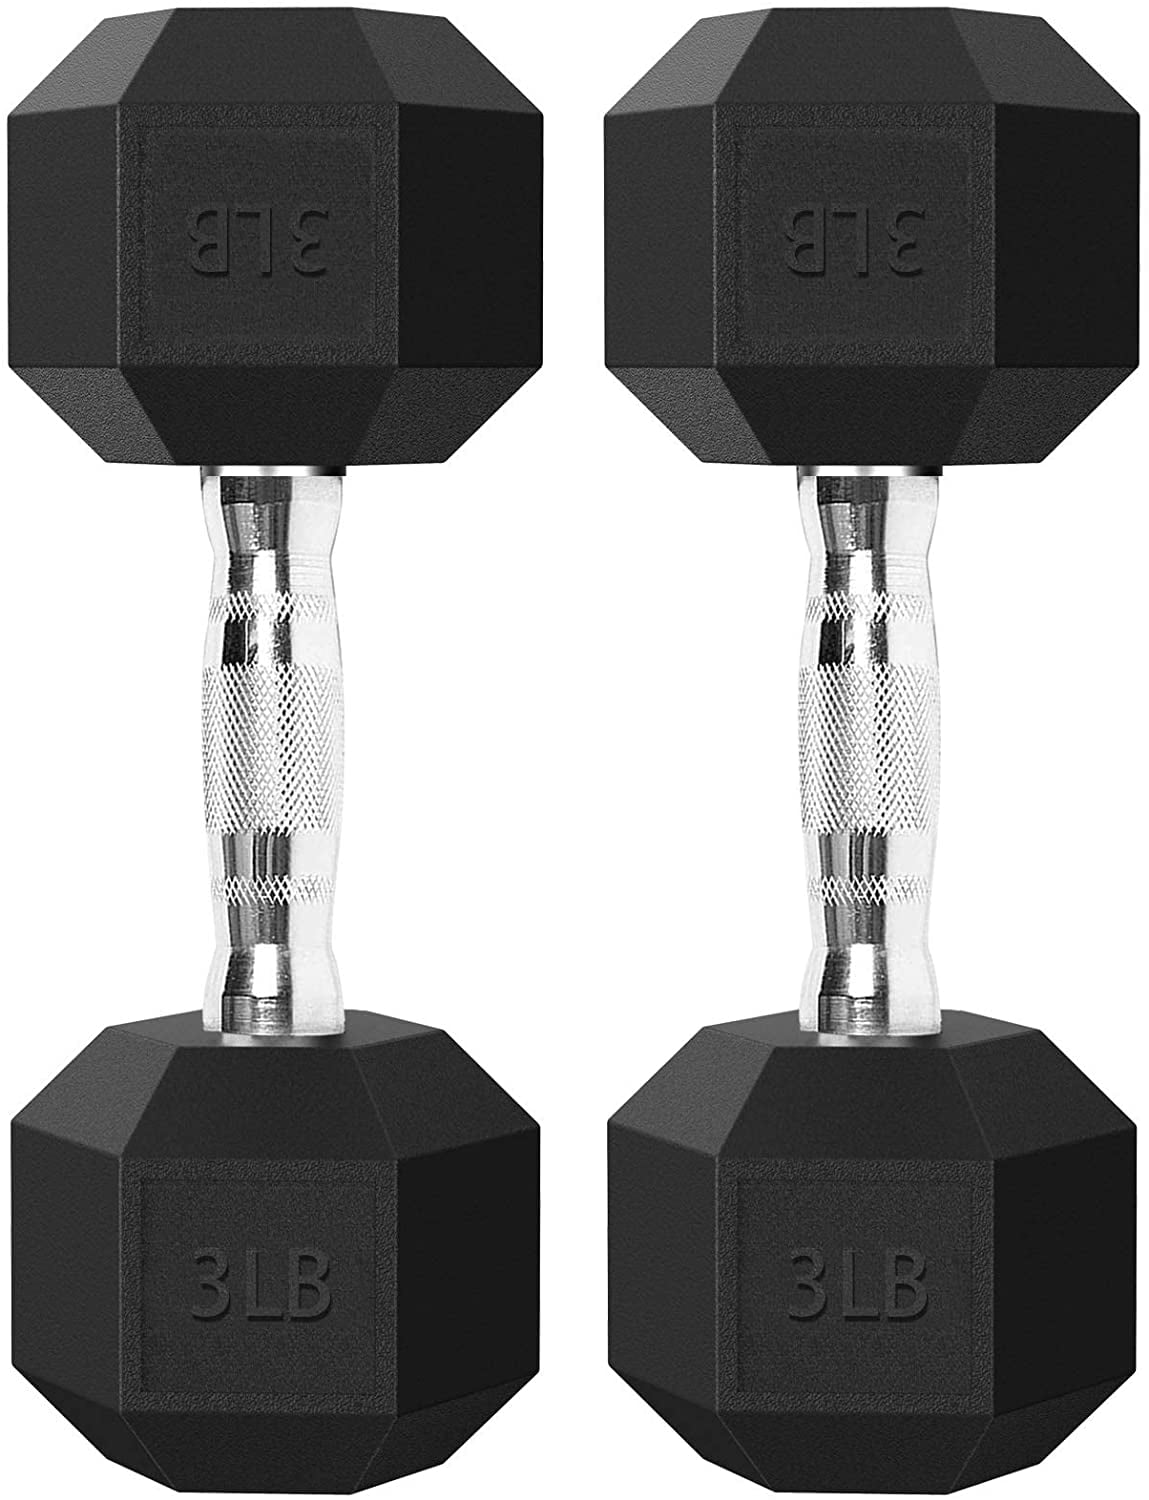 NEW Iron Cast Hex Dumbbells Weights 5 10 15 20 25 30 35 45 50 LBS Home Gym 